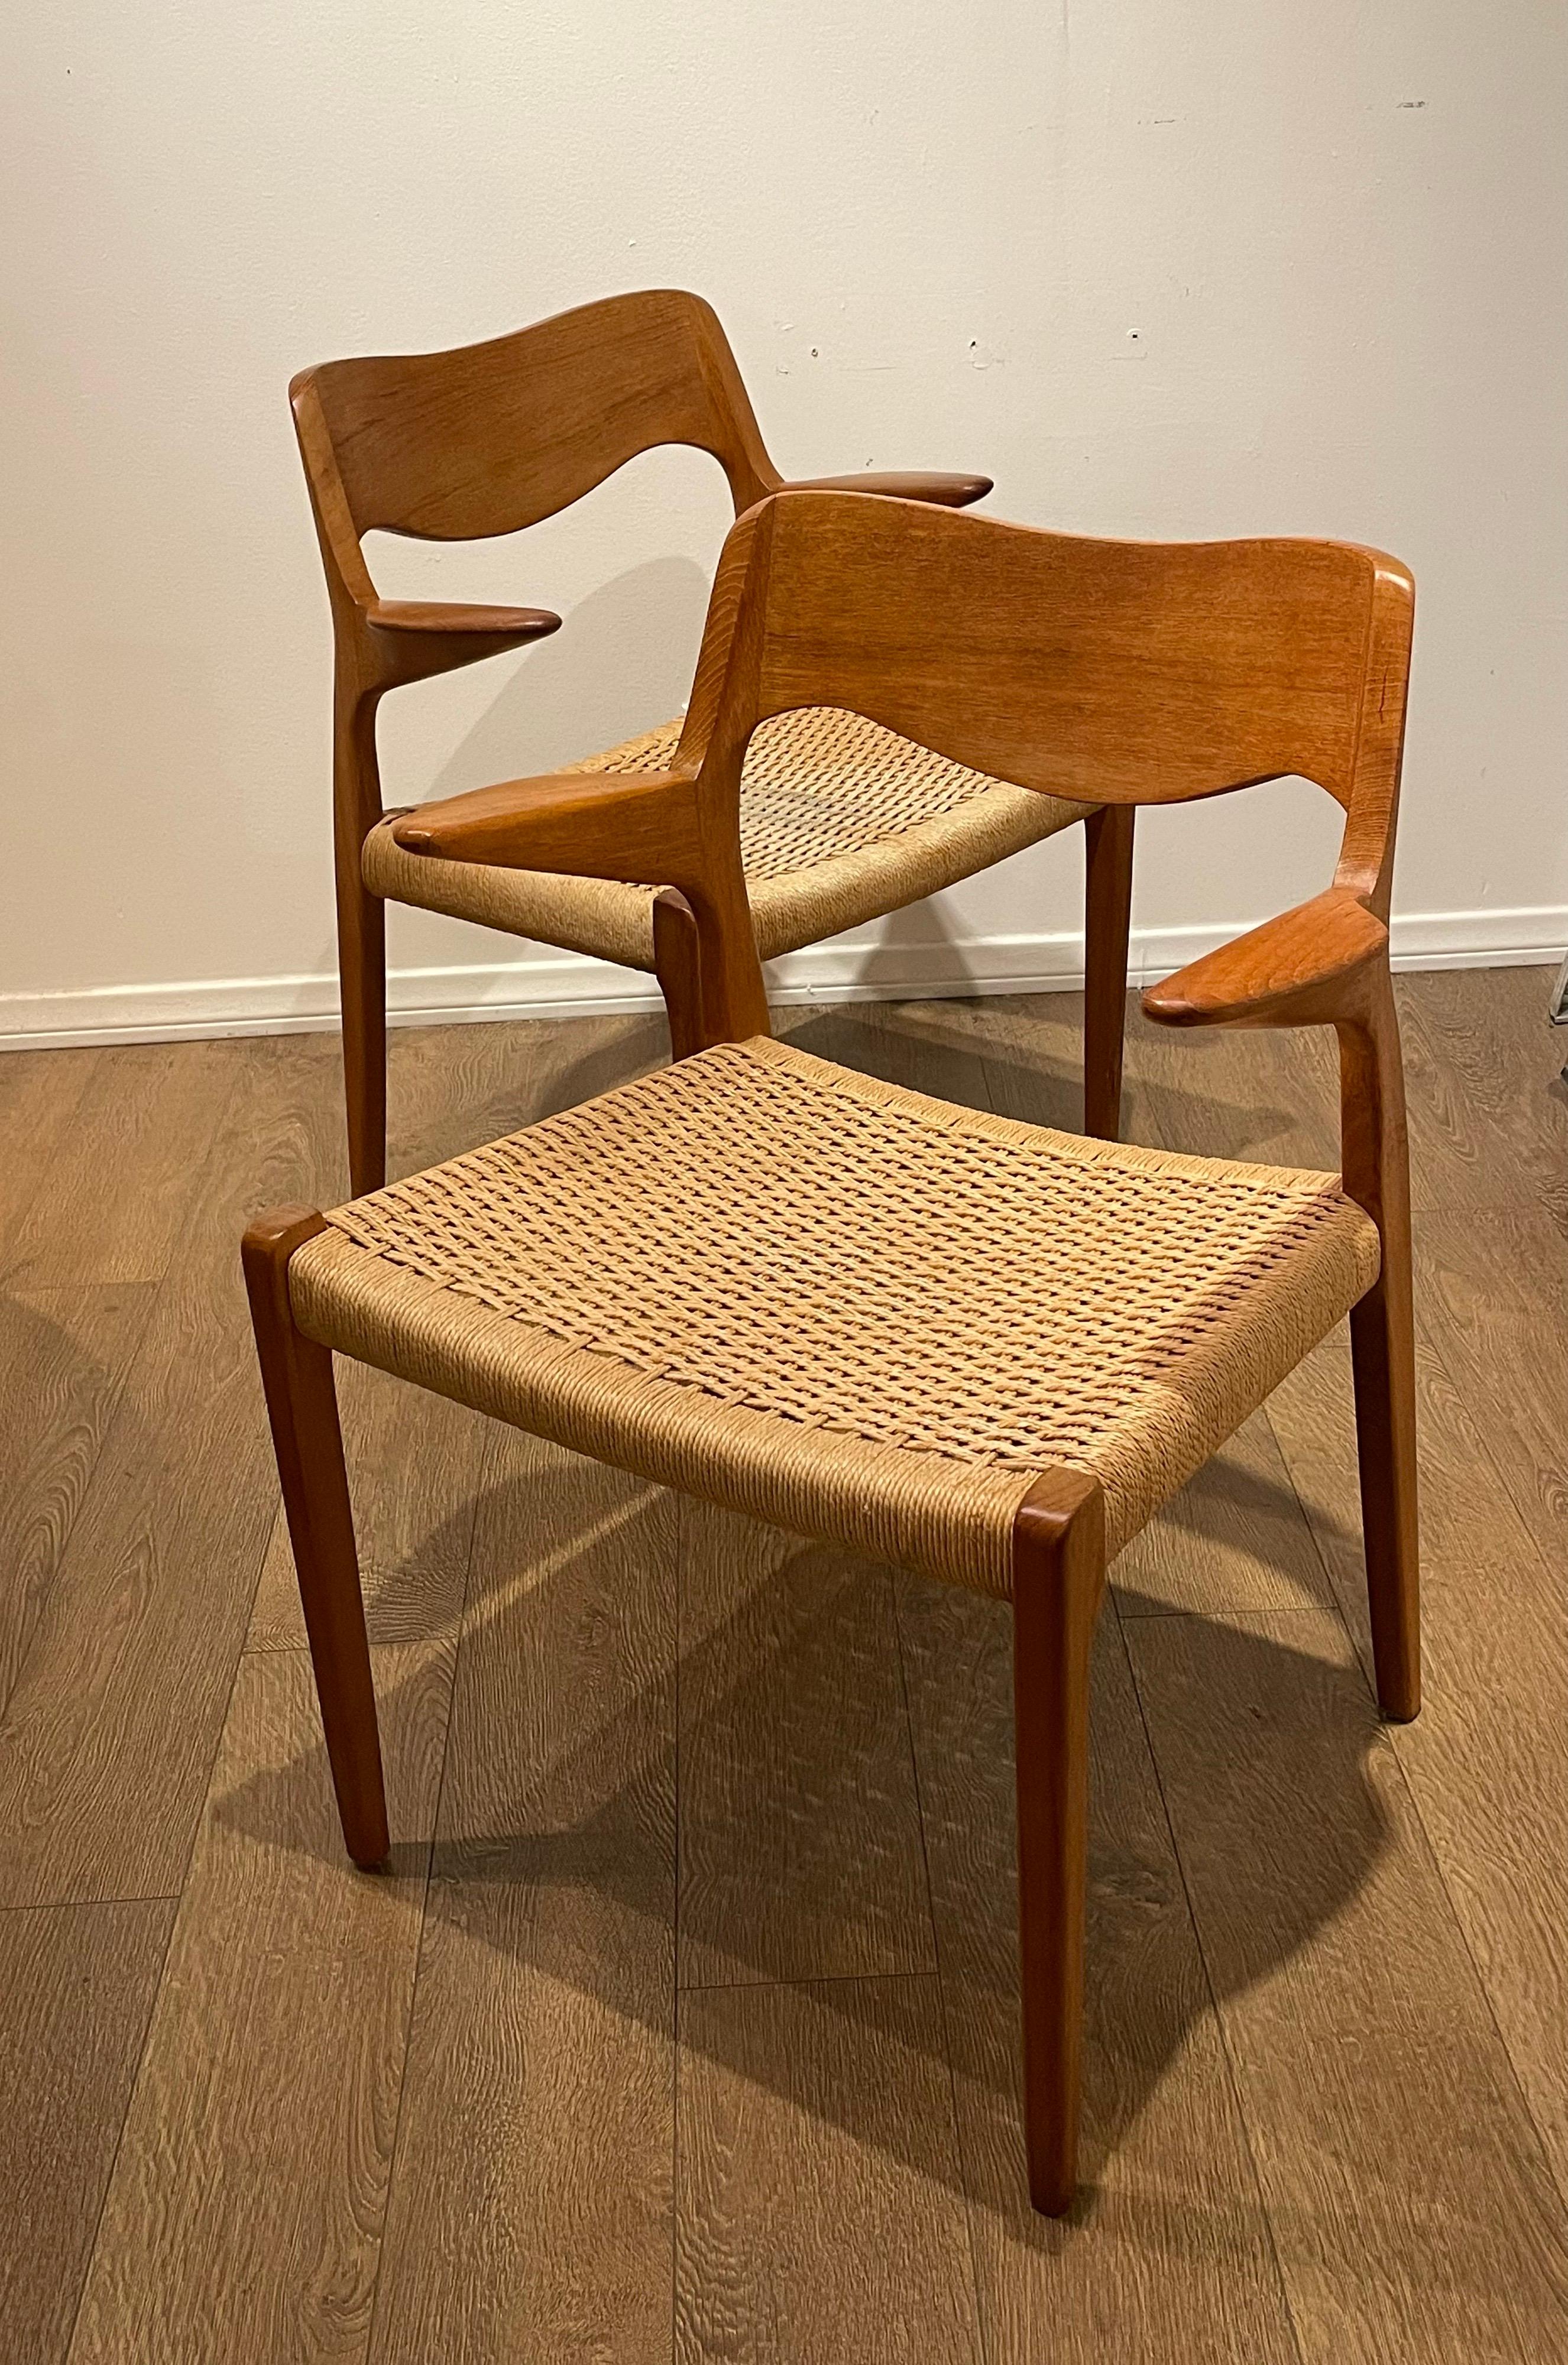 Set of (2) vintage Danish rope seat dining armchairs by Niels Otto Moller. The model 71 classic roped seat armchair has been an icon of Danish Modern design since its introduction by J.L. Moller. Take a look at the chairs from all angles. The back